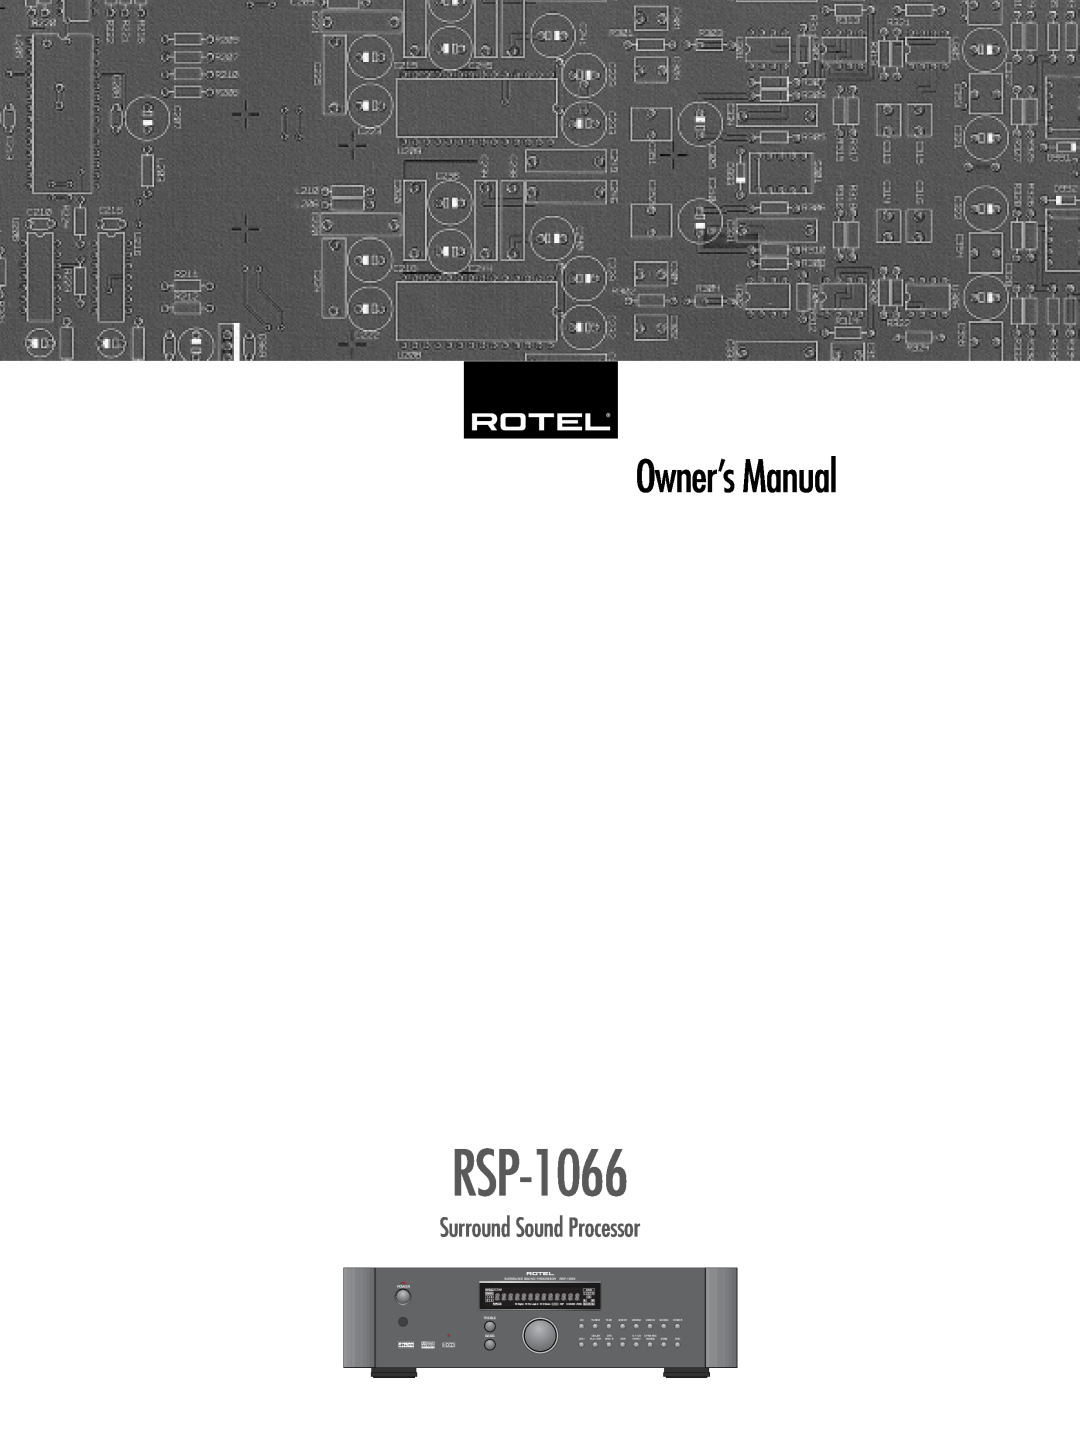 Rotel RSP-1066 owner manual Surround Sound Processor 